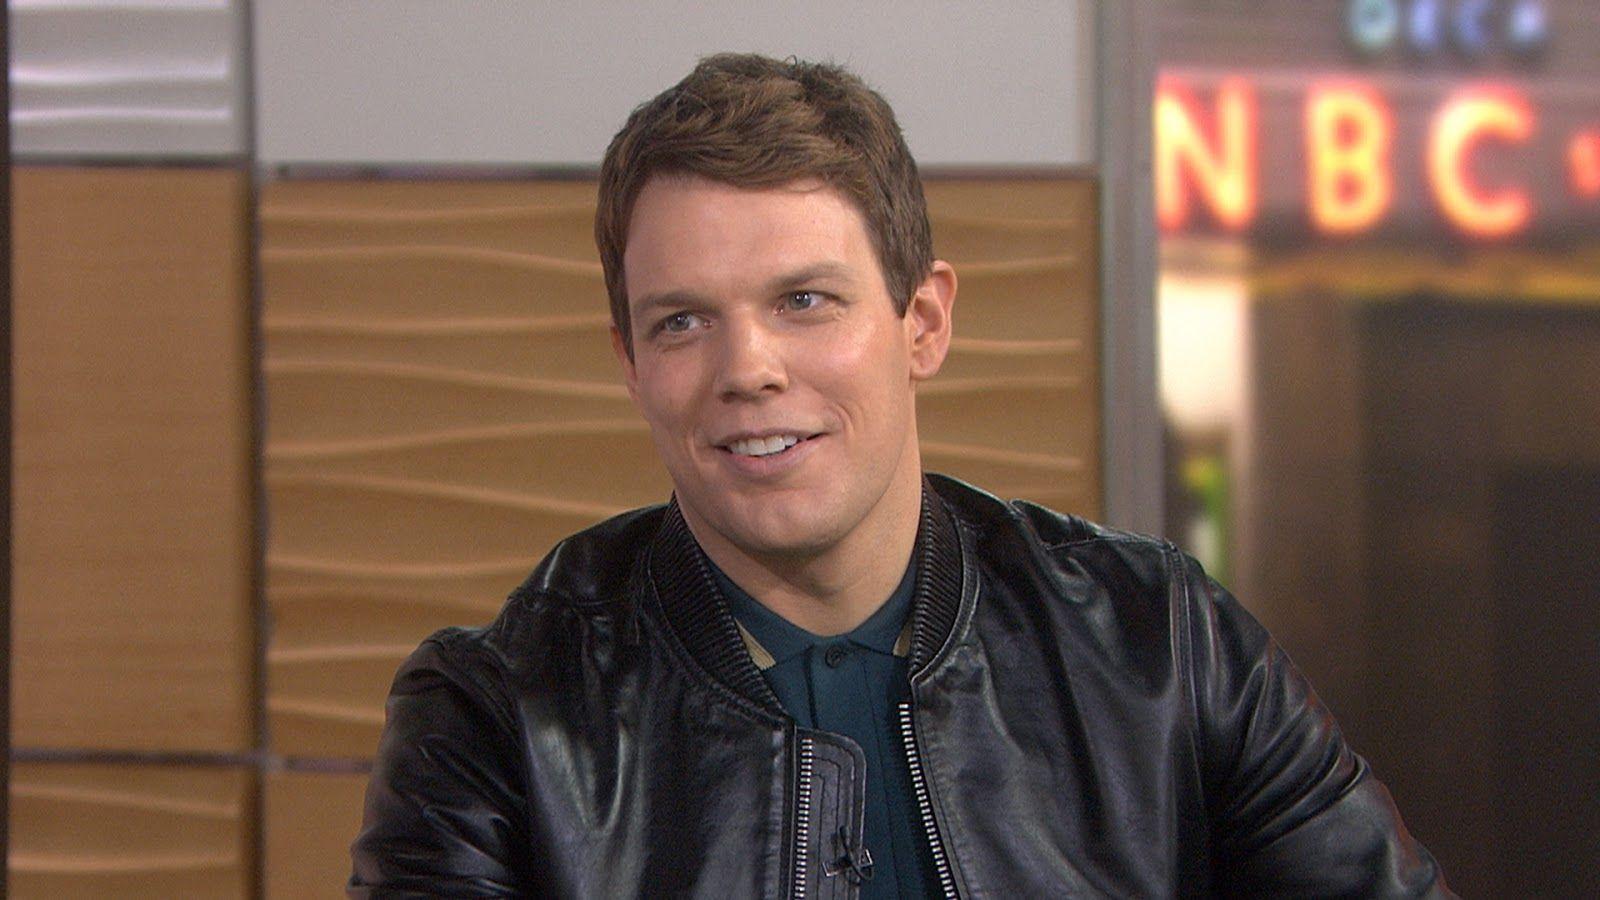 Jake Lacy All Upcoming Movies List 2017 With Release Dates